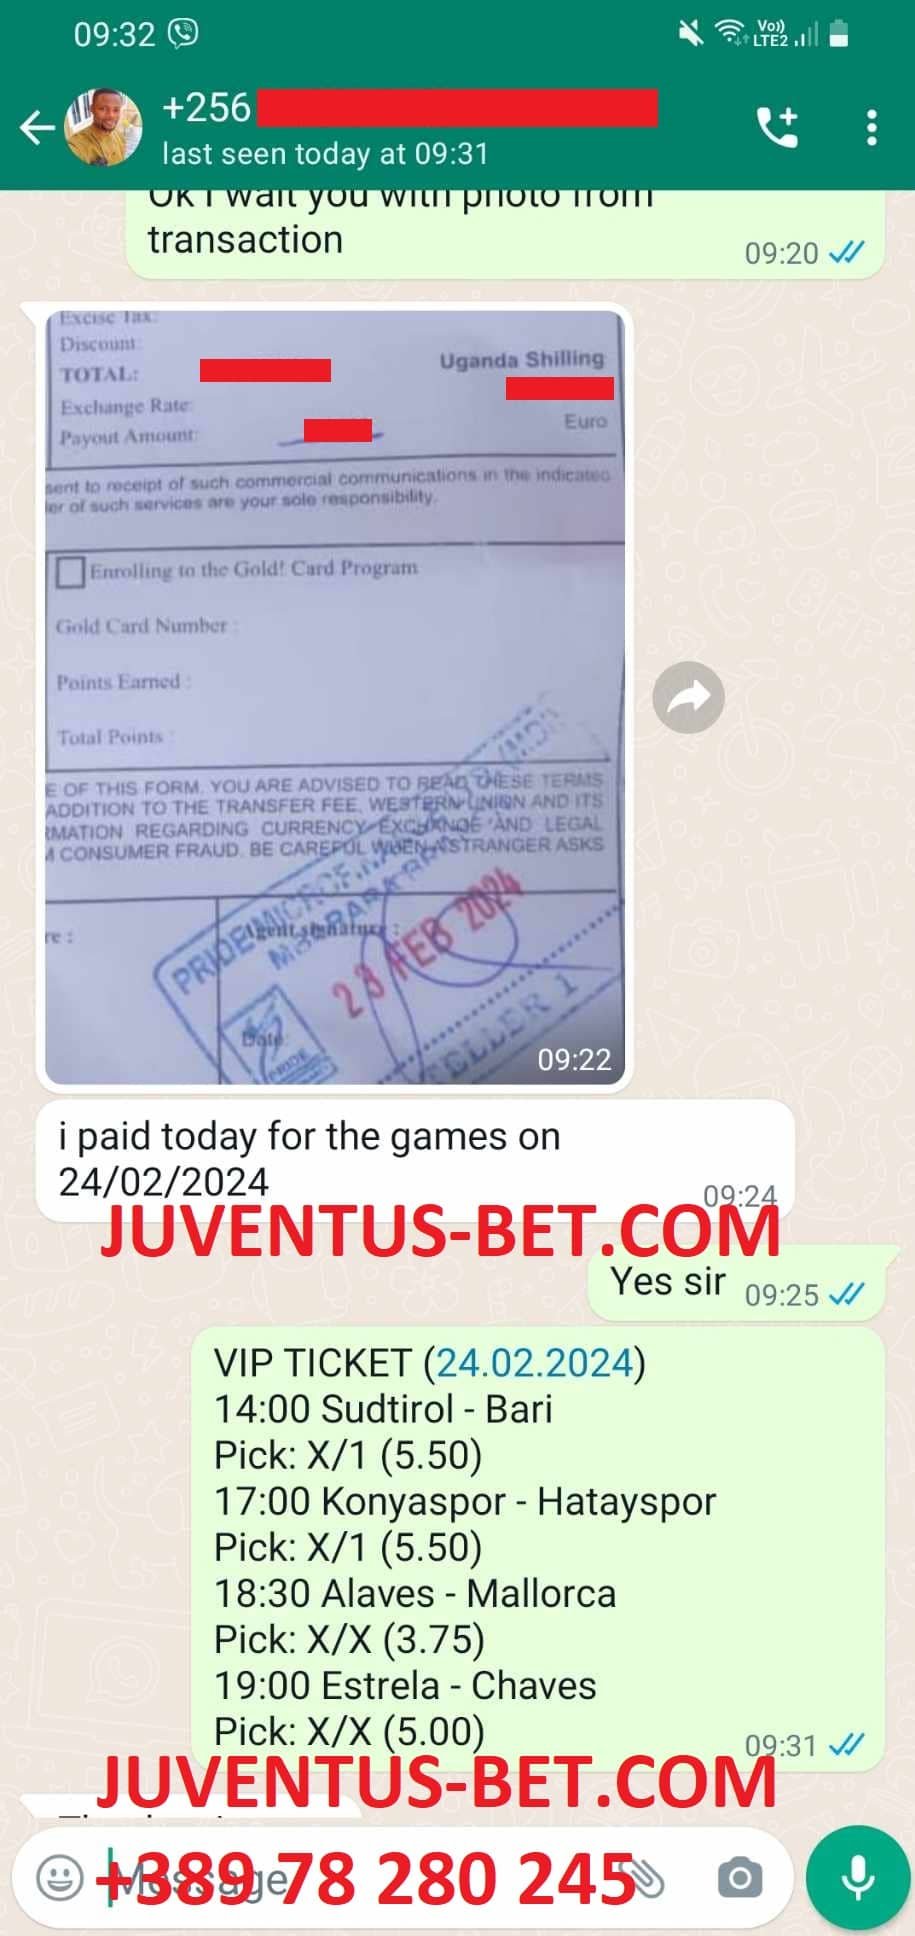 Vip Ticket Offer Fixed Matches